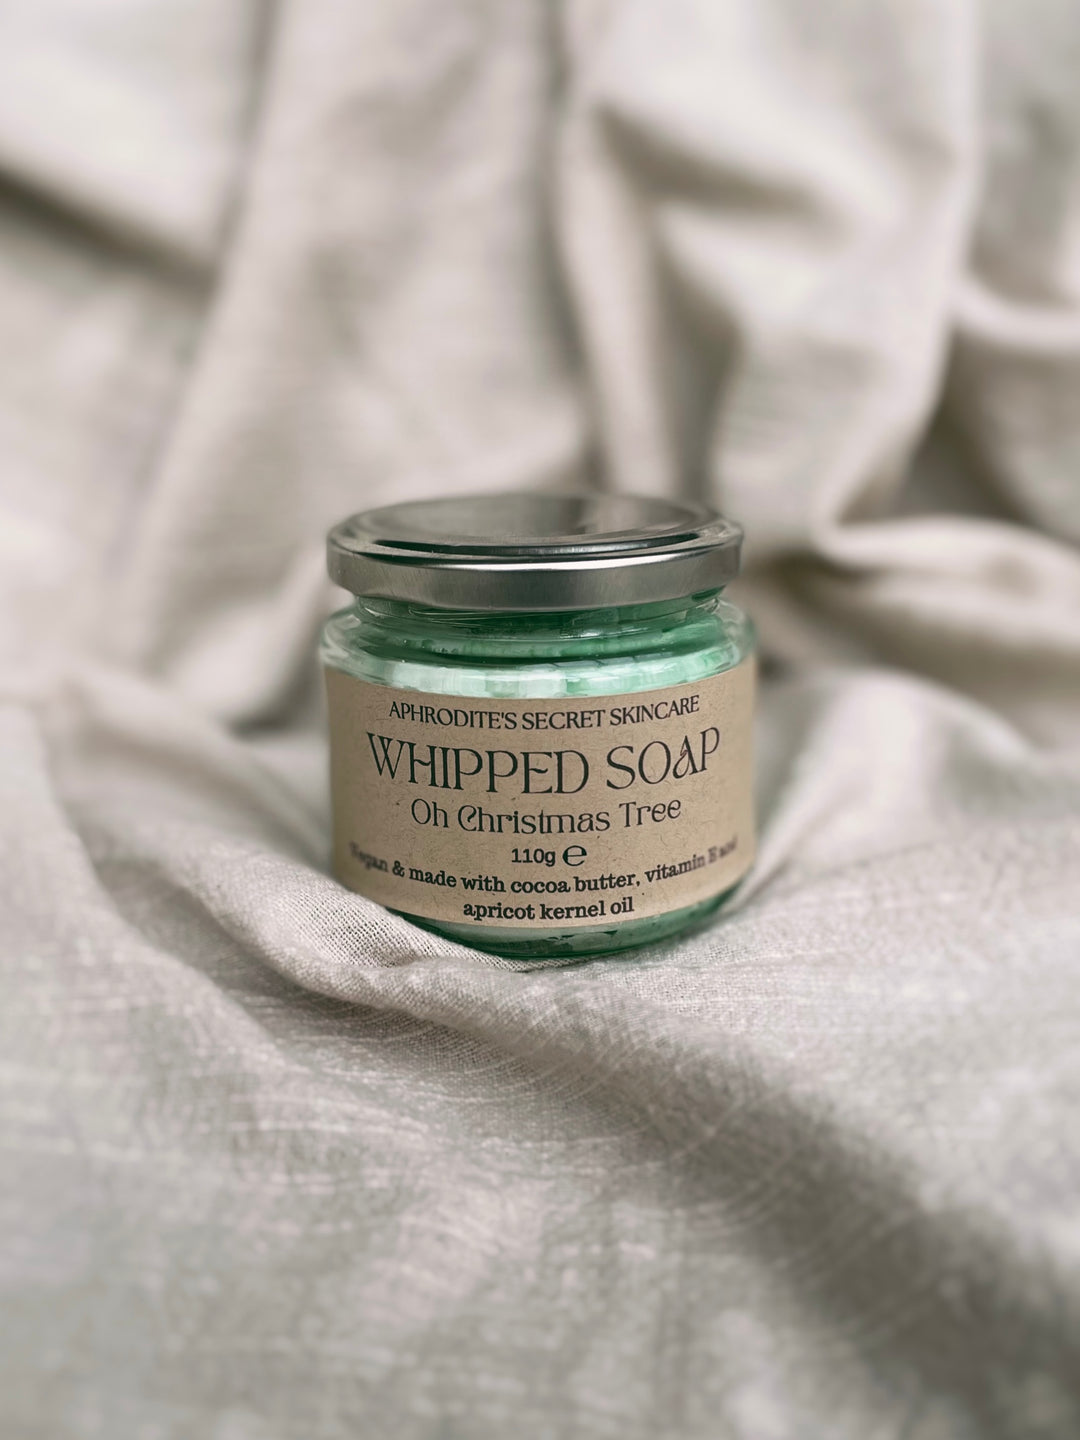 Oh Christmas Tree Whipped Soap